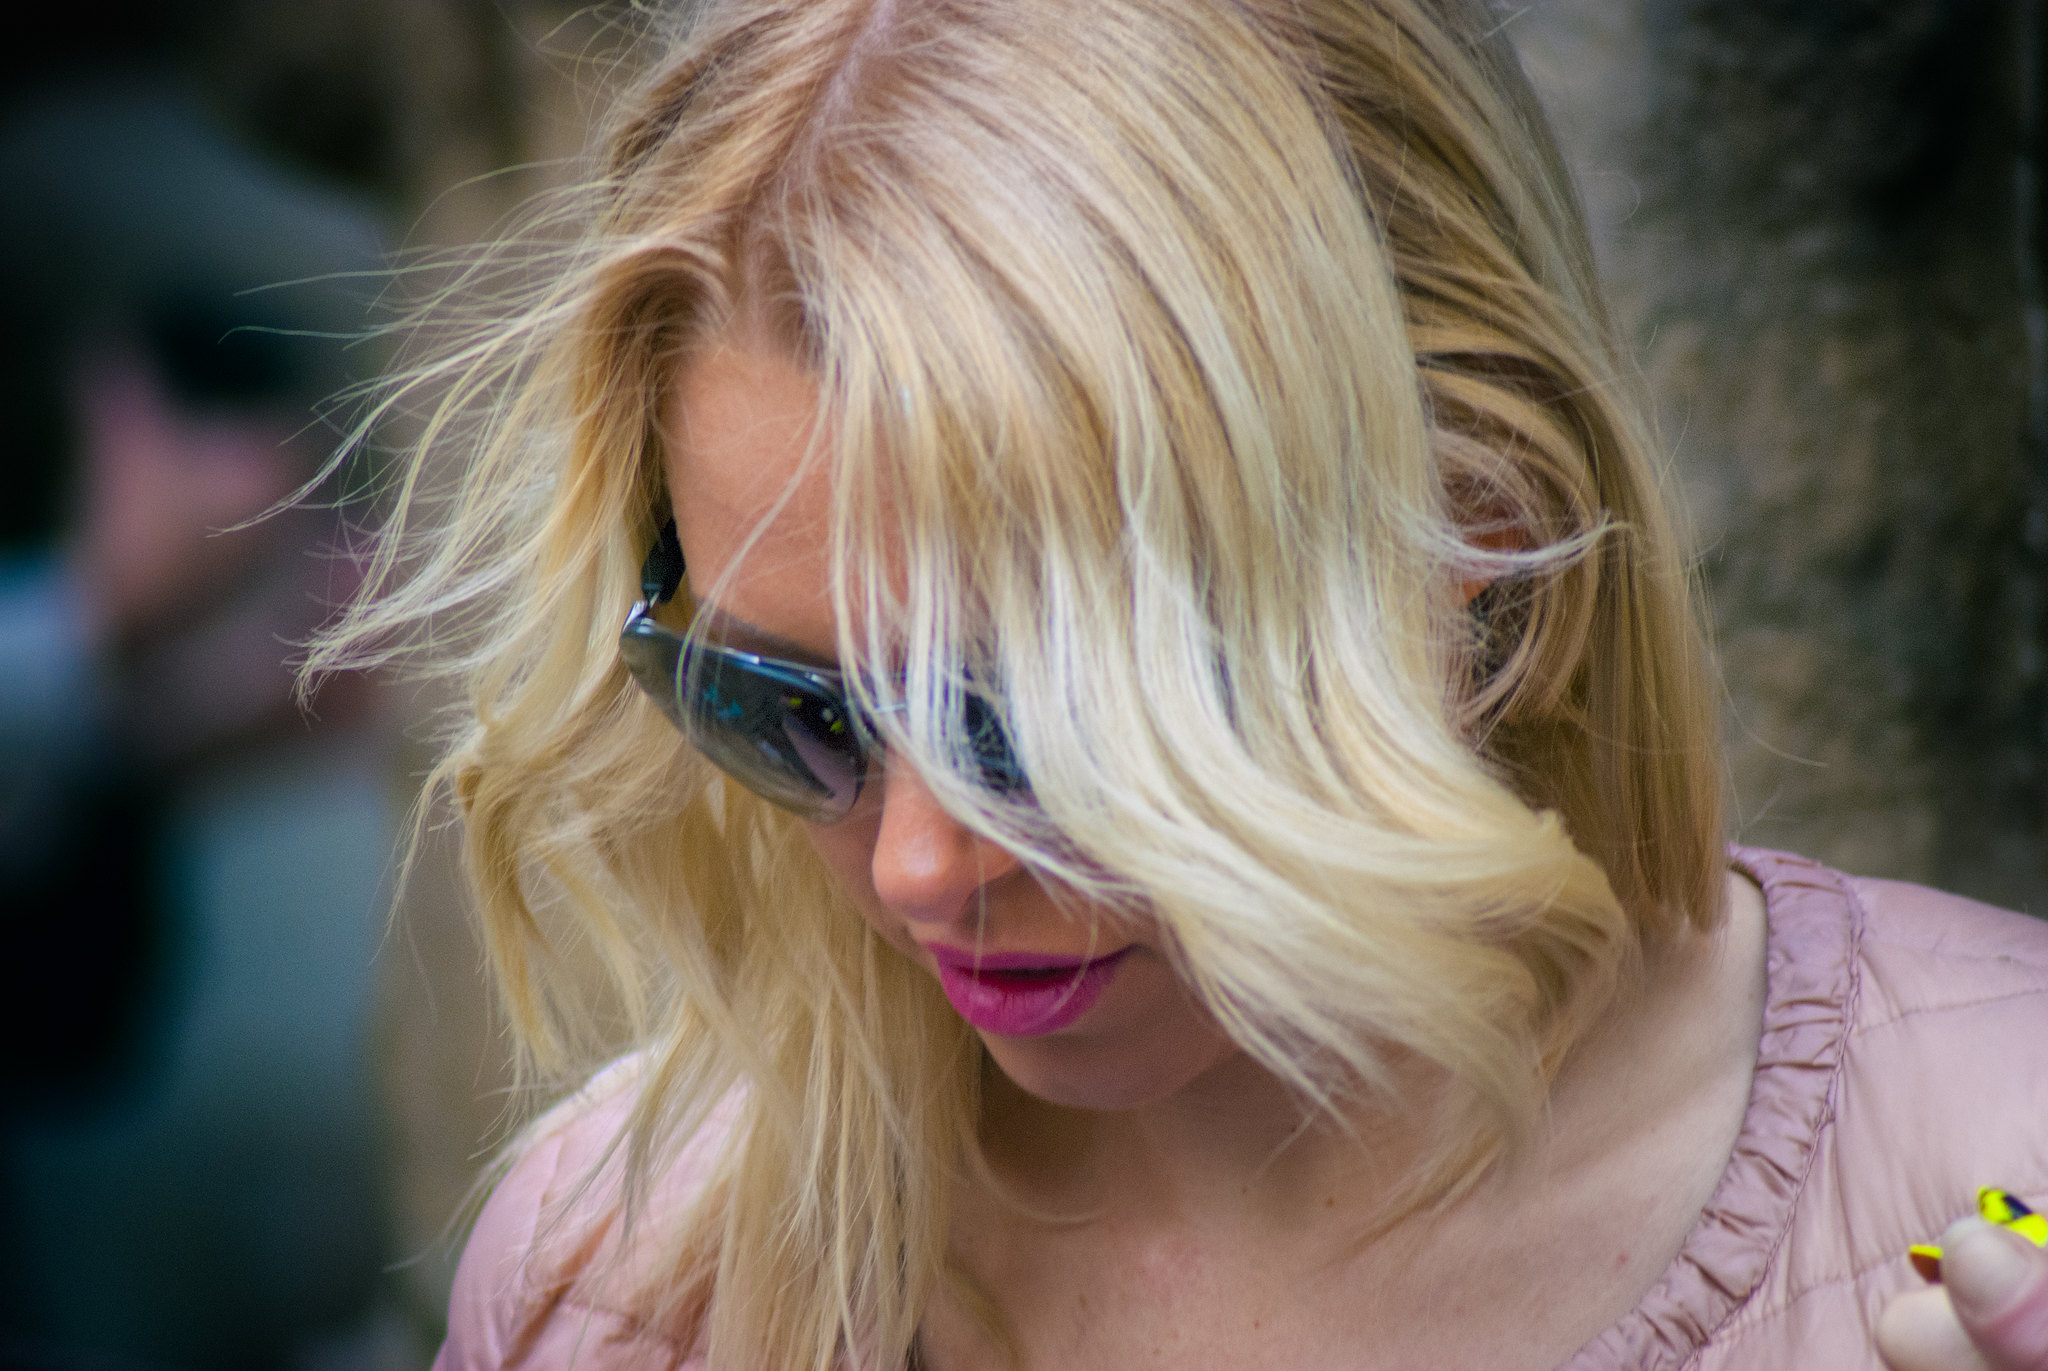 A blonde-haired woman looking down while wearing sunglasses | Source: Flickr